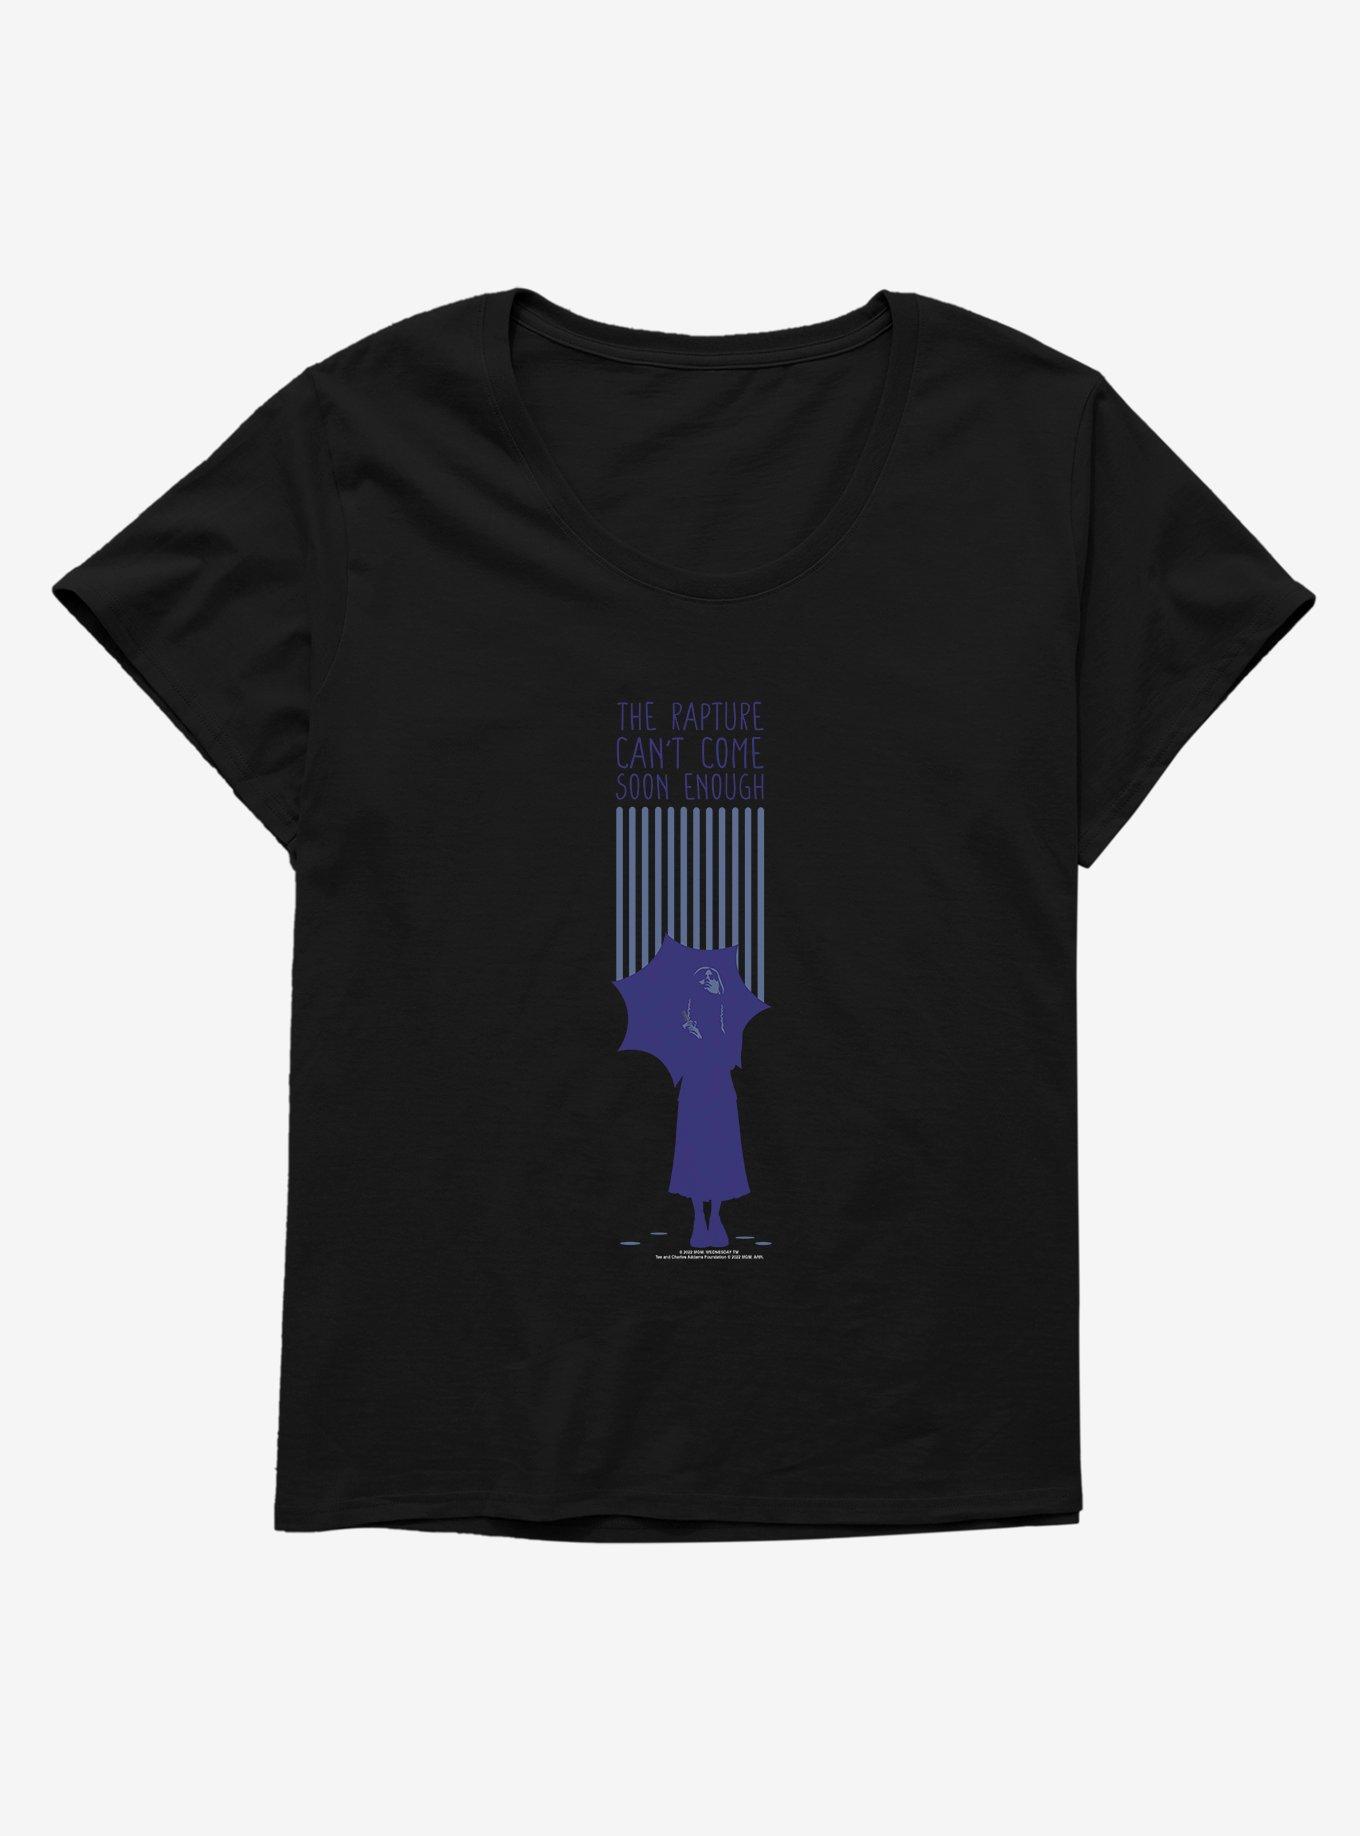 Wednesday The Rapture Womens T-Shirt Plus Size, BLACK, hi-res